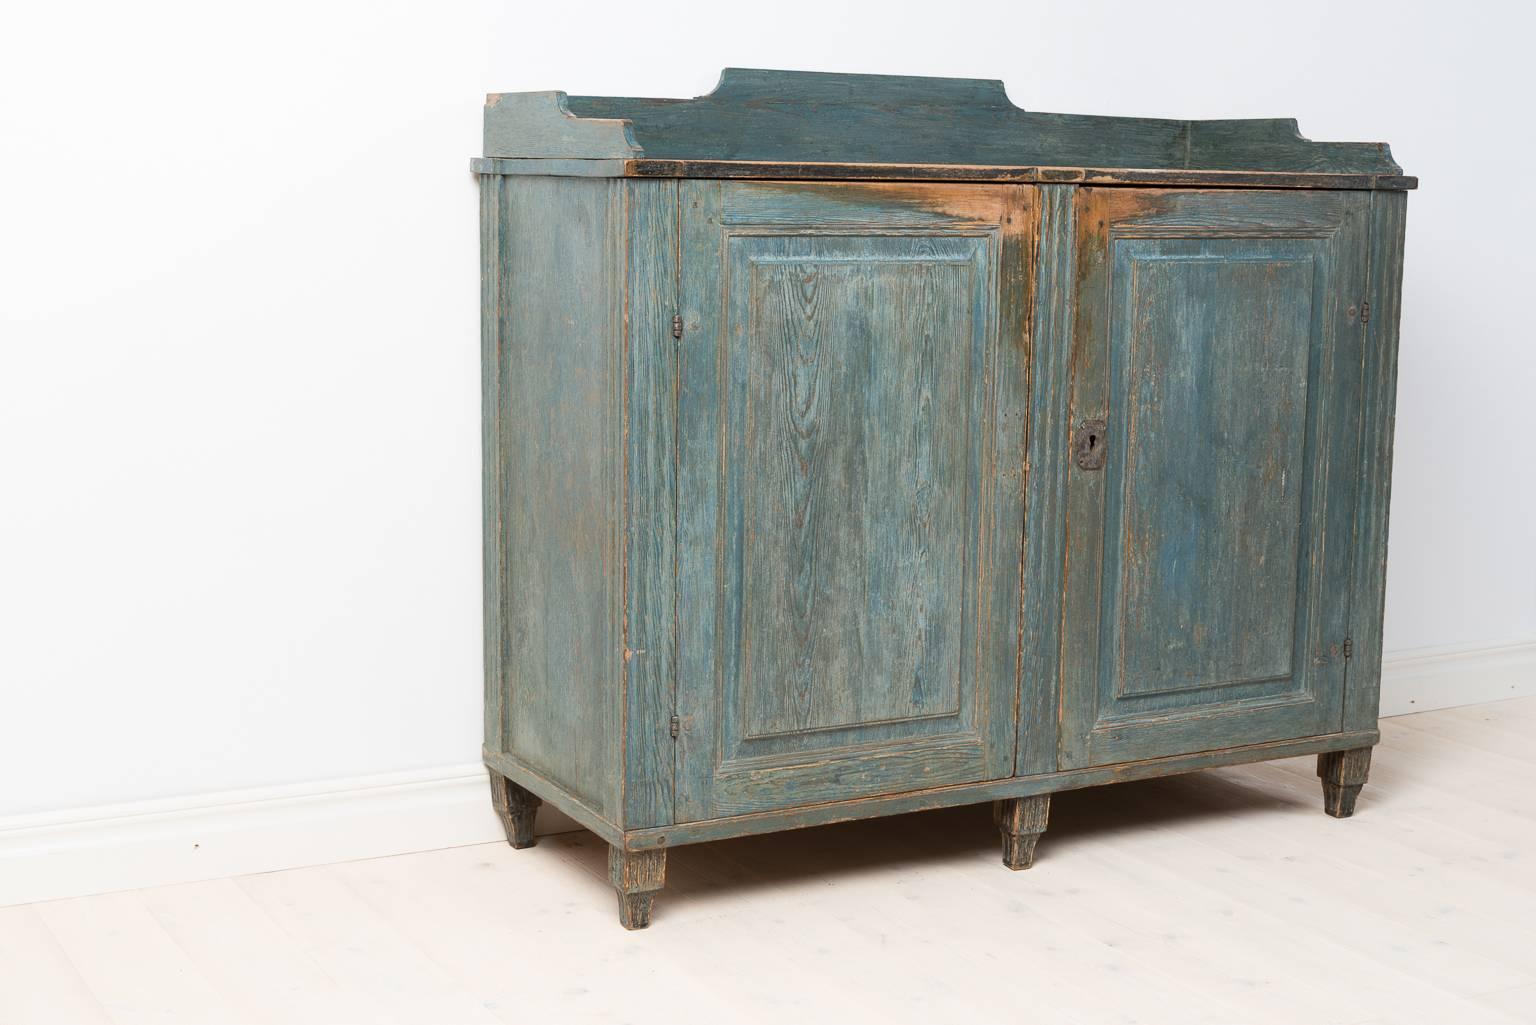 Rare period gustavian sideboard from northern Sweden. The front is dry scraped to the blue original paint. The inside in completely untouched with its original dark blue paint. Original lock.  Sweden circa 1780